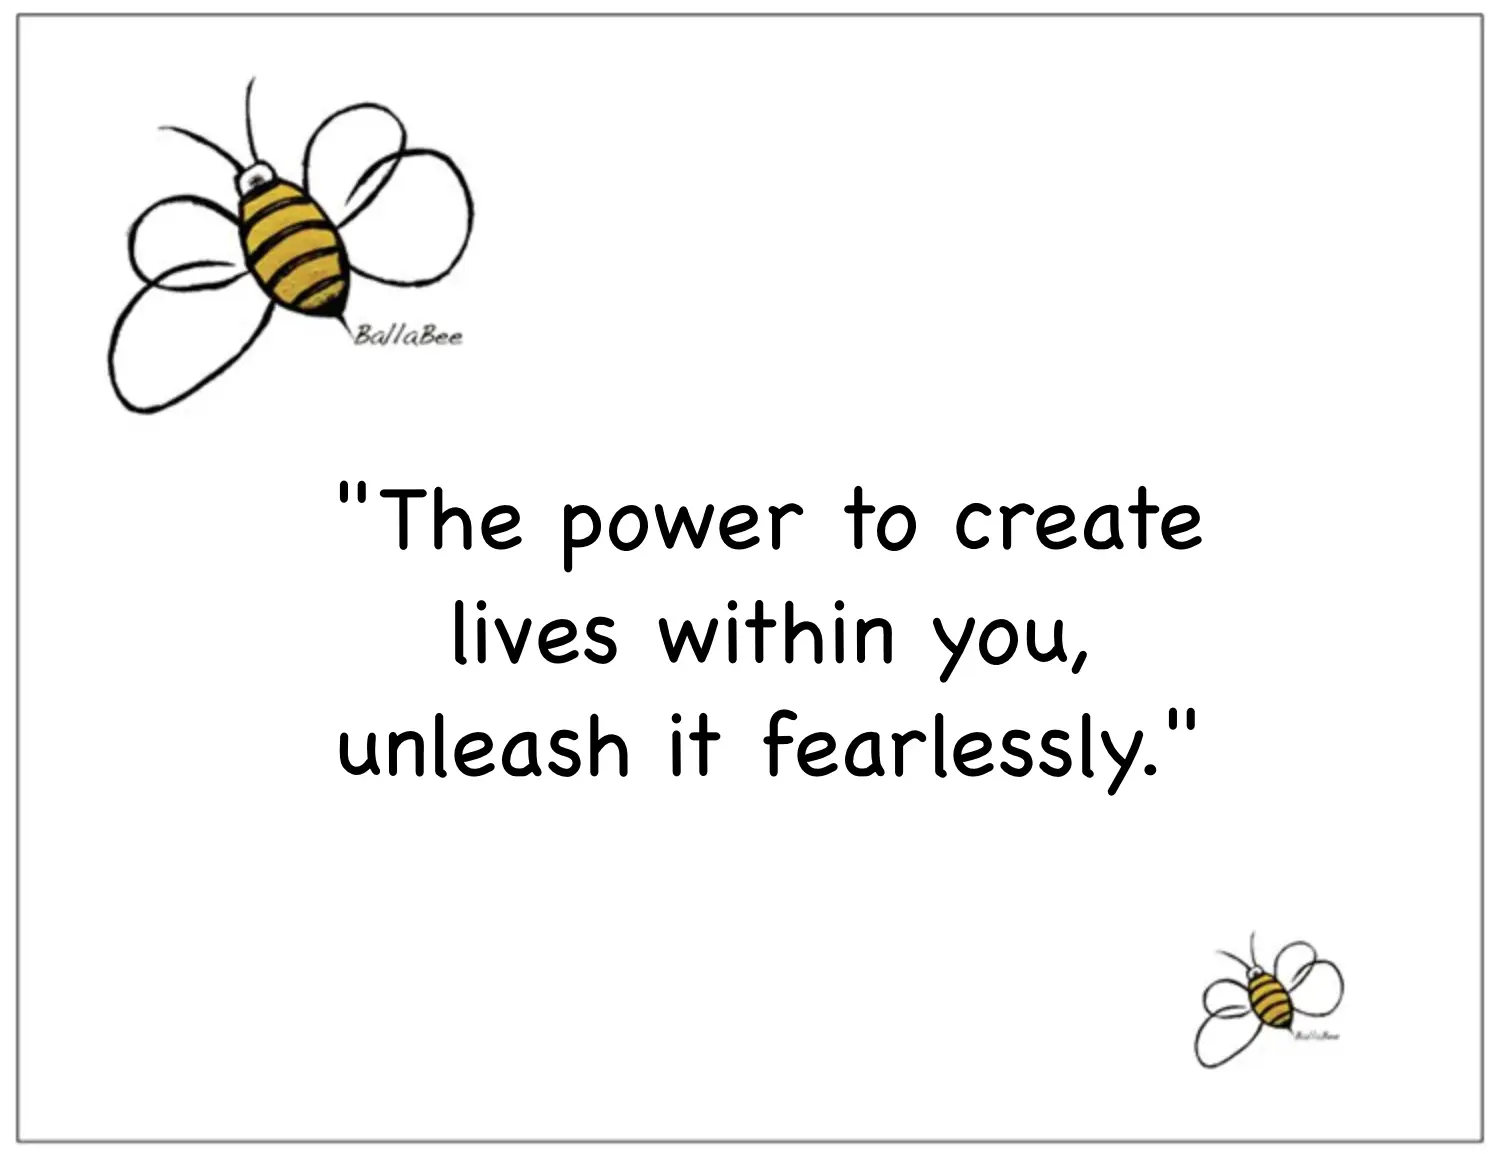 The power to create lies within you, unleash it fearlessly